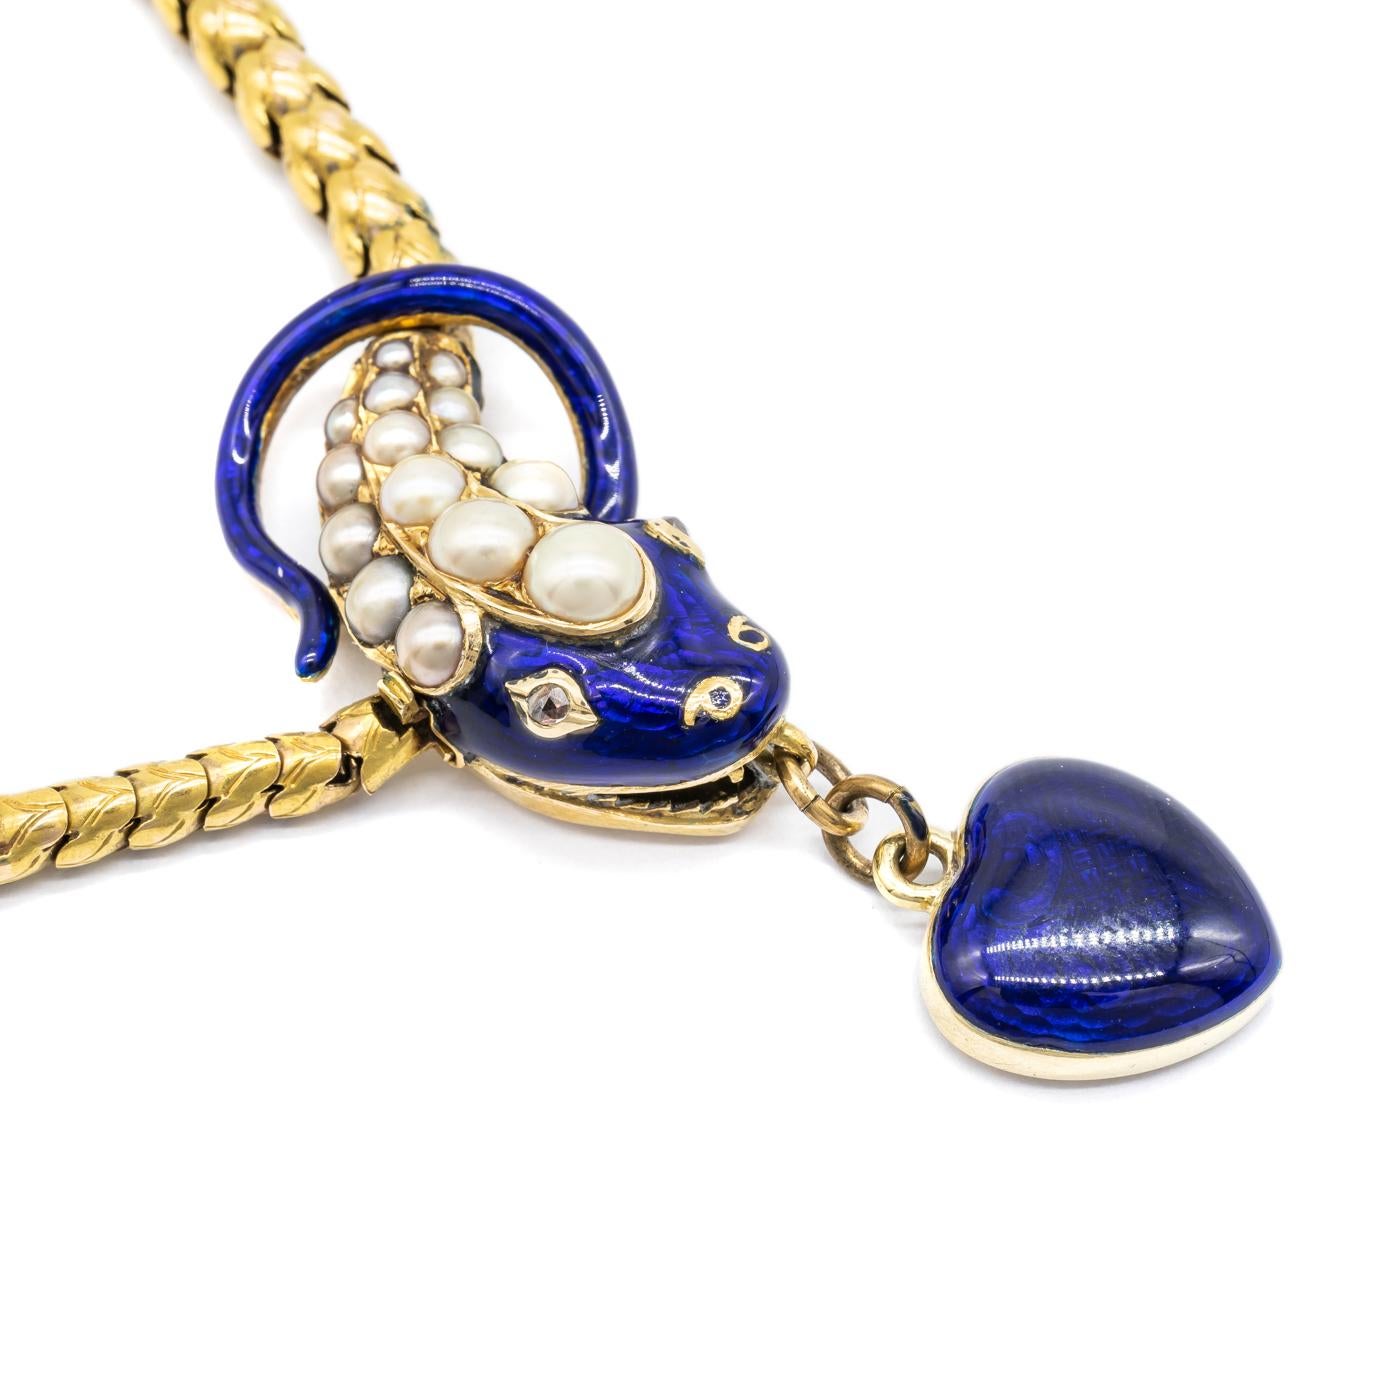 An antique snake necklace, with a gold scale link body and blue enamelled head, set with natural half pearls, with diamond eyes, with a blue enamel heart drop suspended from its mouth, with a locket back containing hair and a monogram. Length